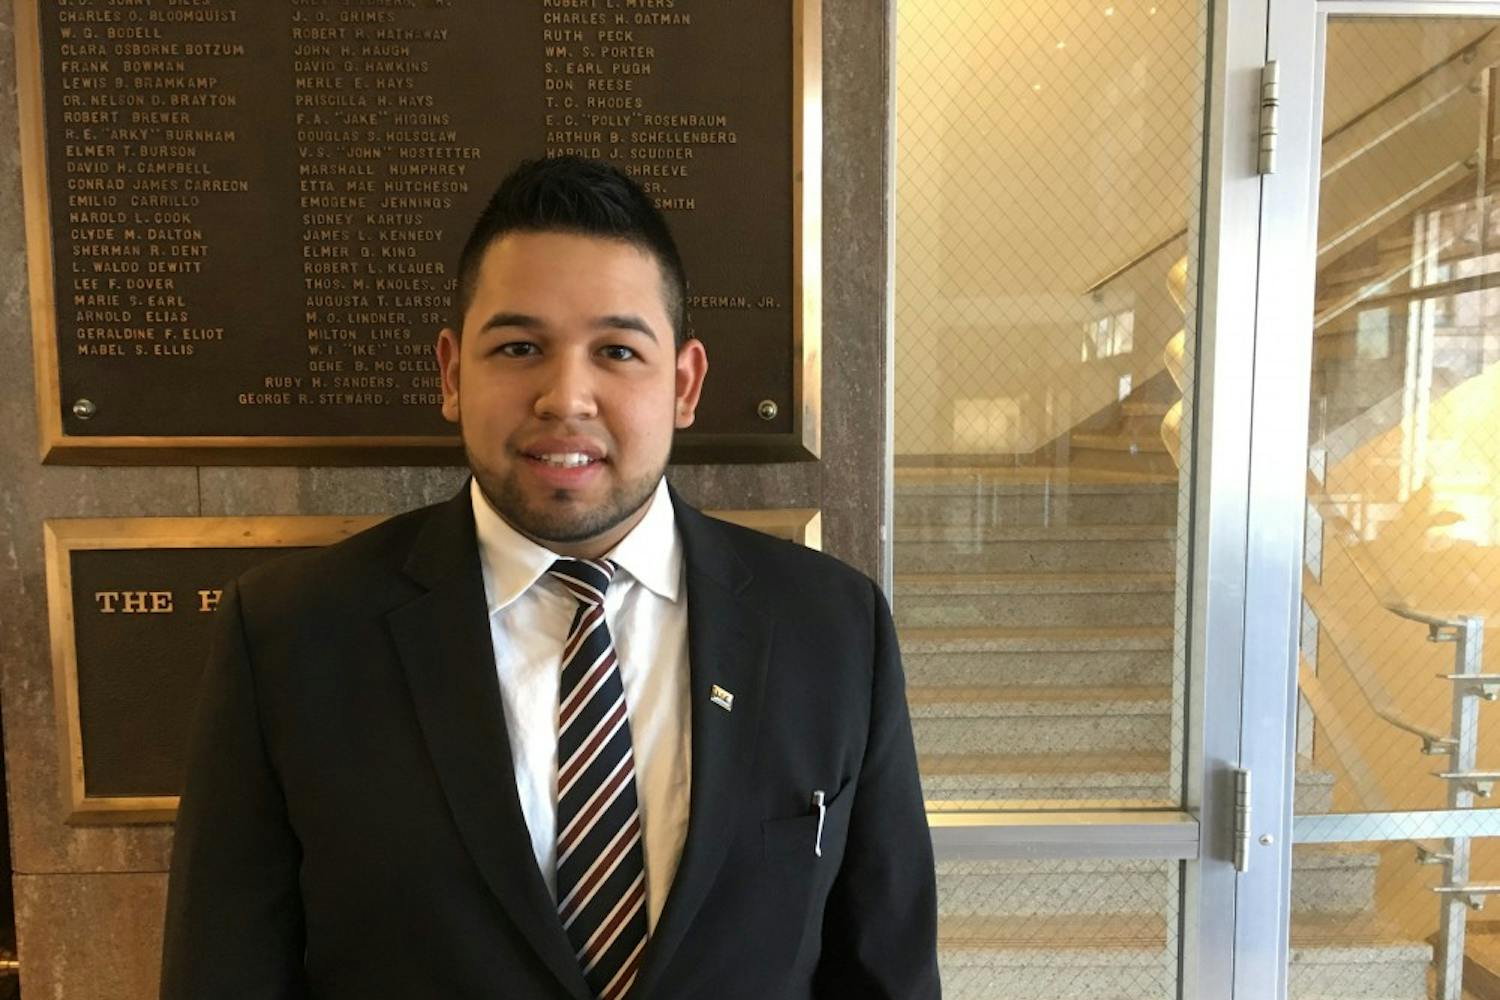 Mario Marquez, public service and&nbsp;public policy junior at ASU,&nbsp;pictured&nbsp;at the Arizona House of Representatives on Jan. 30, 2017. He said the at-risk youth program&nbsp;helped him gain internships and opportunities as well as helping him grow in the community.